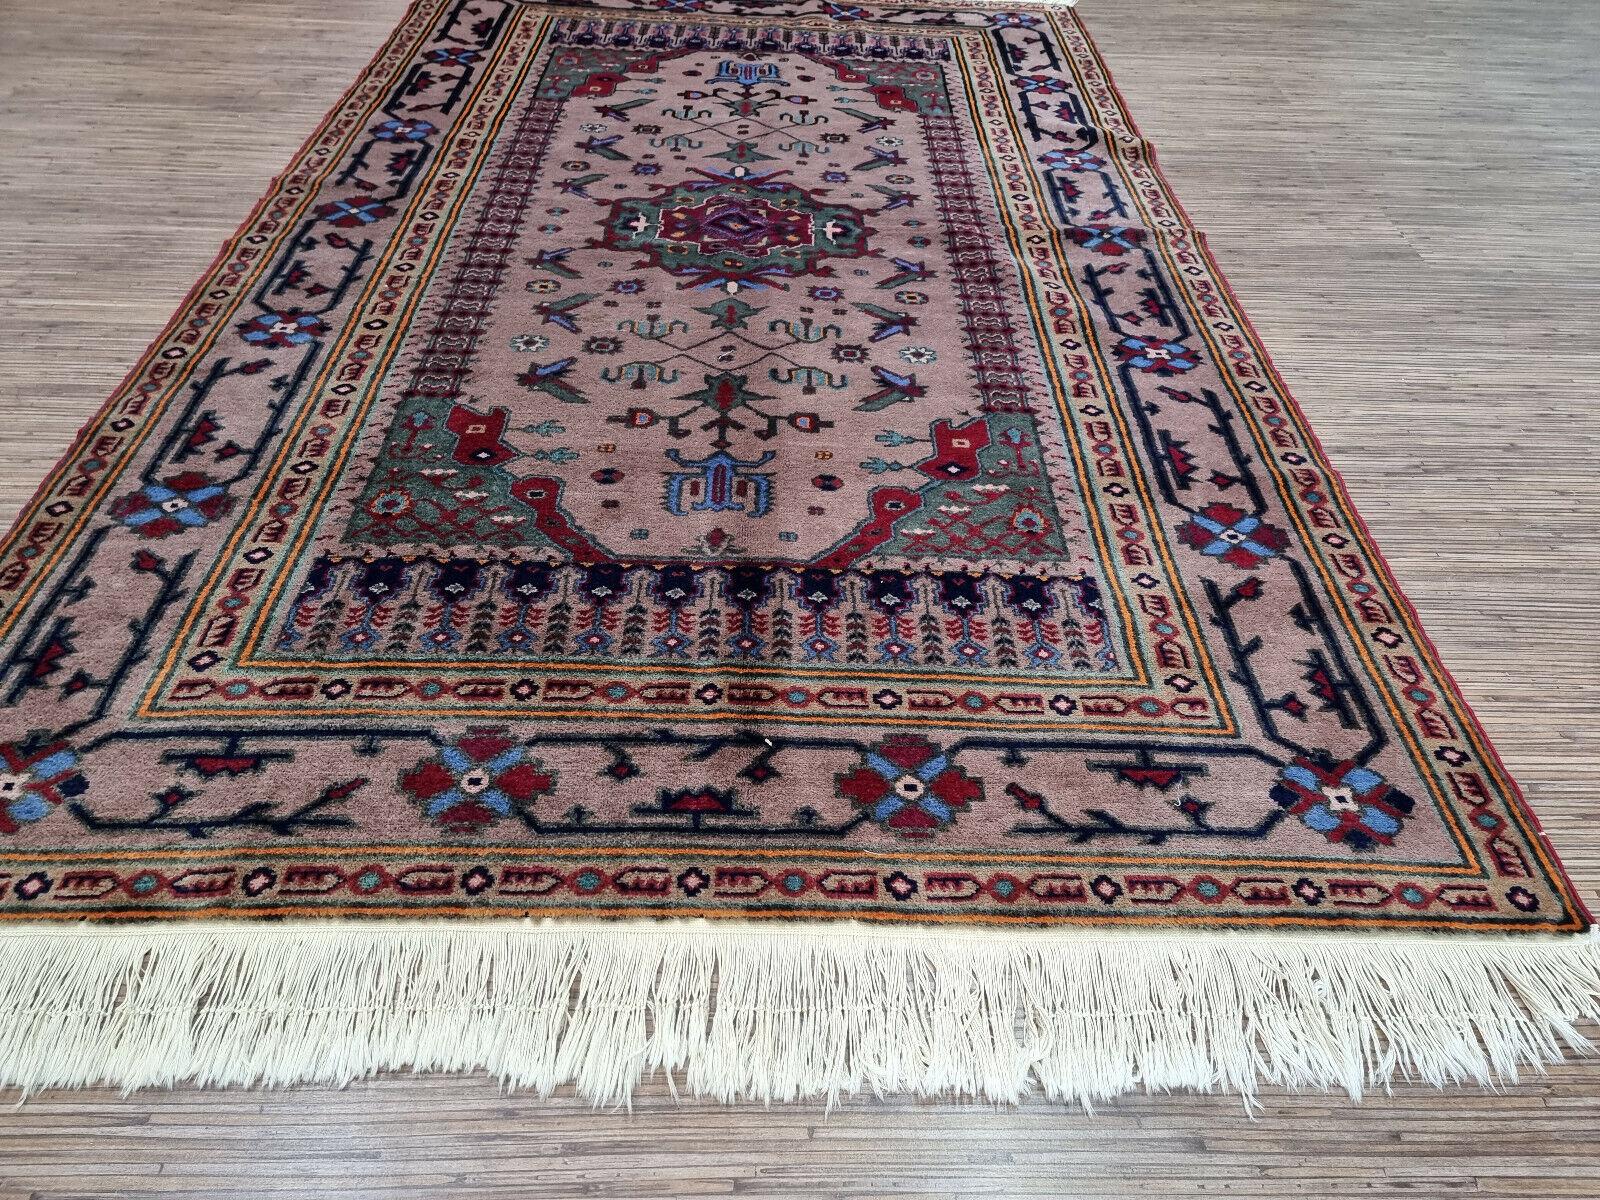 Hand-Knotted Handmade Vintage Caucasian Shirvan Rug 4' x 6.6', 1960s - 1D76 For Sale